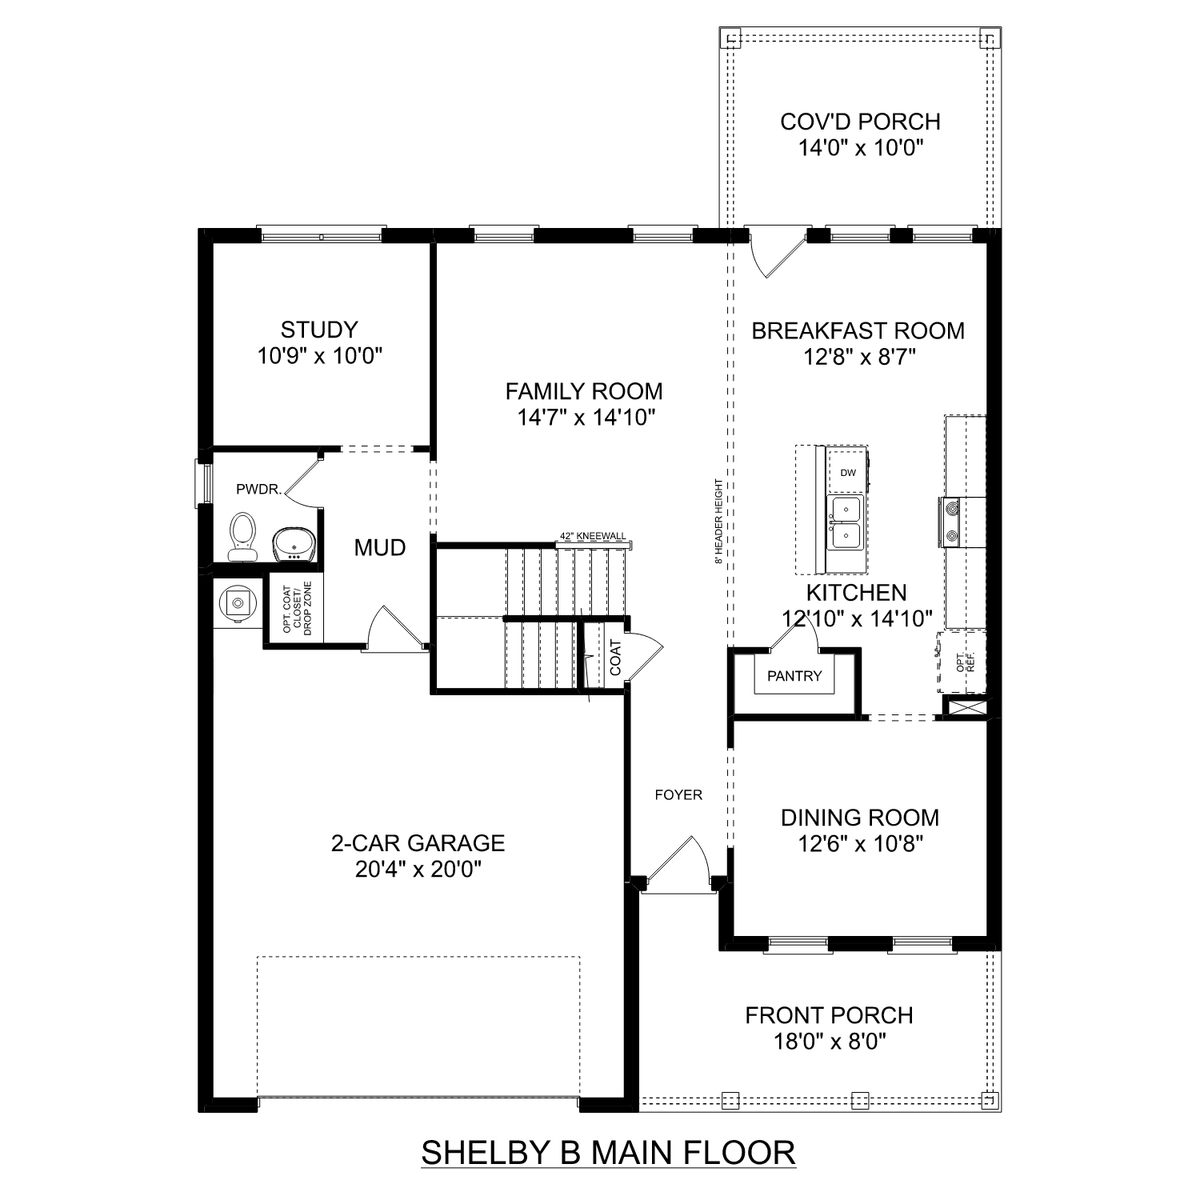 1 - The Shelby B buildable floor plan layout in Davidson Homes' Monteagle Cove community.